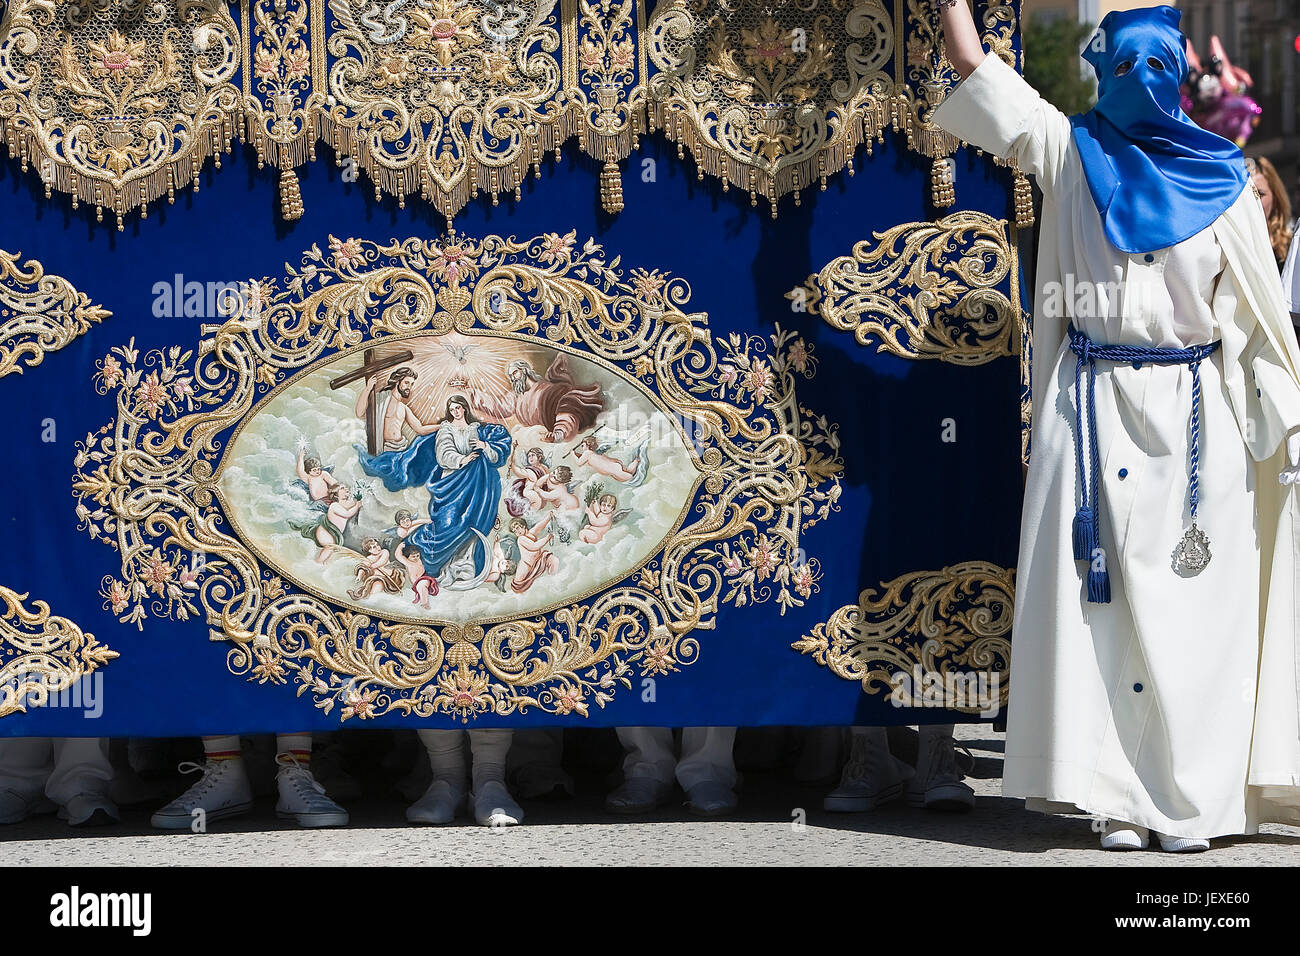 Throne of the Virgin Mary or called palio, embroidered in blue velvet with gold thread, biblical scene embedded on the front, procession of Holy Week, Stock Photo